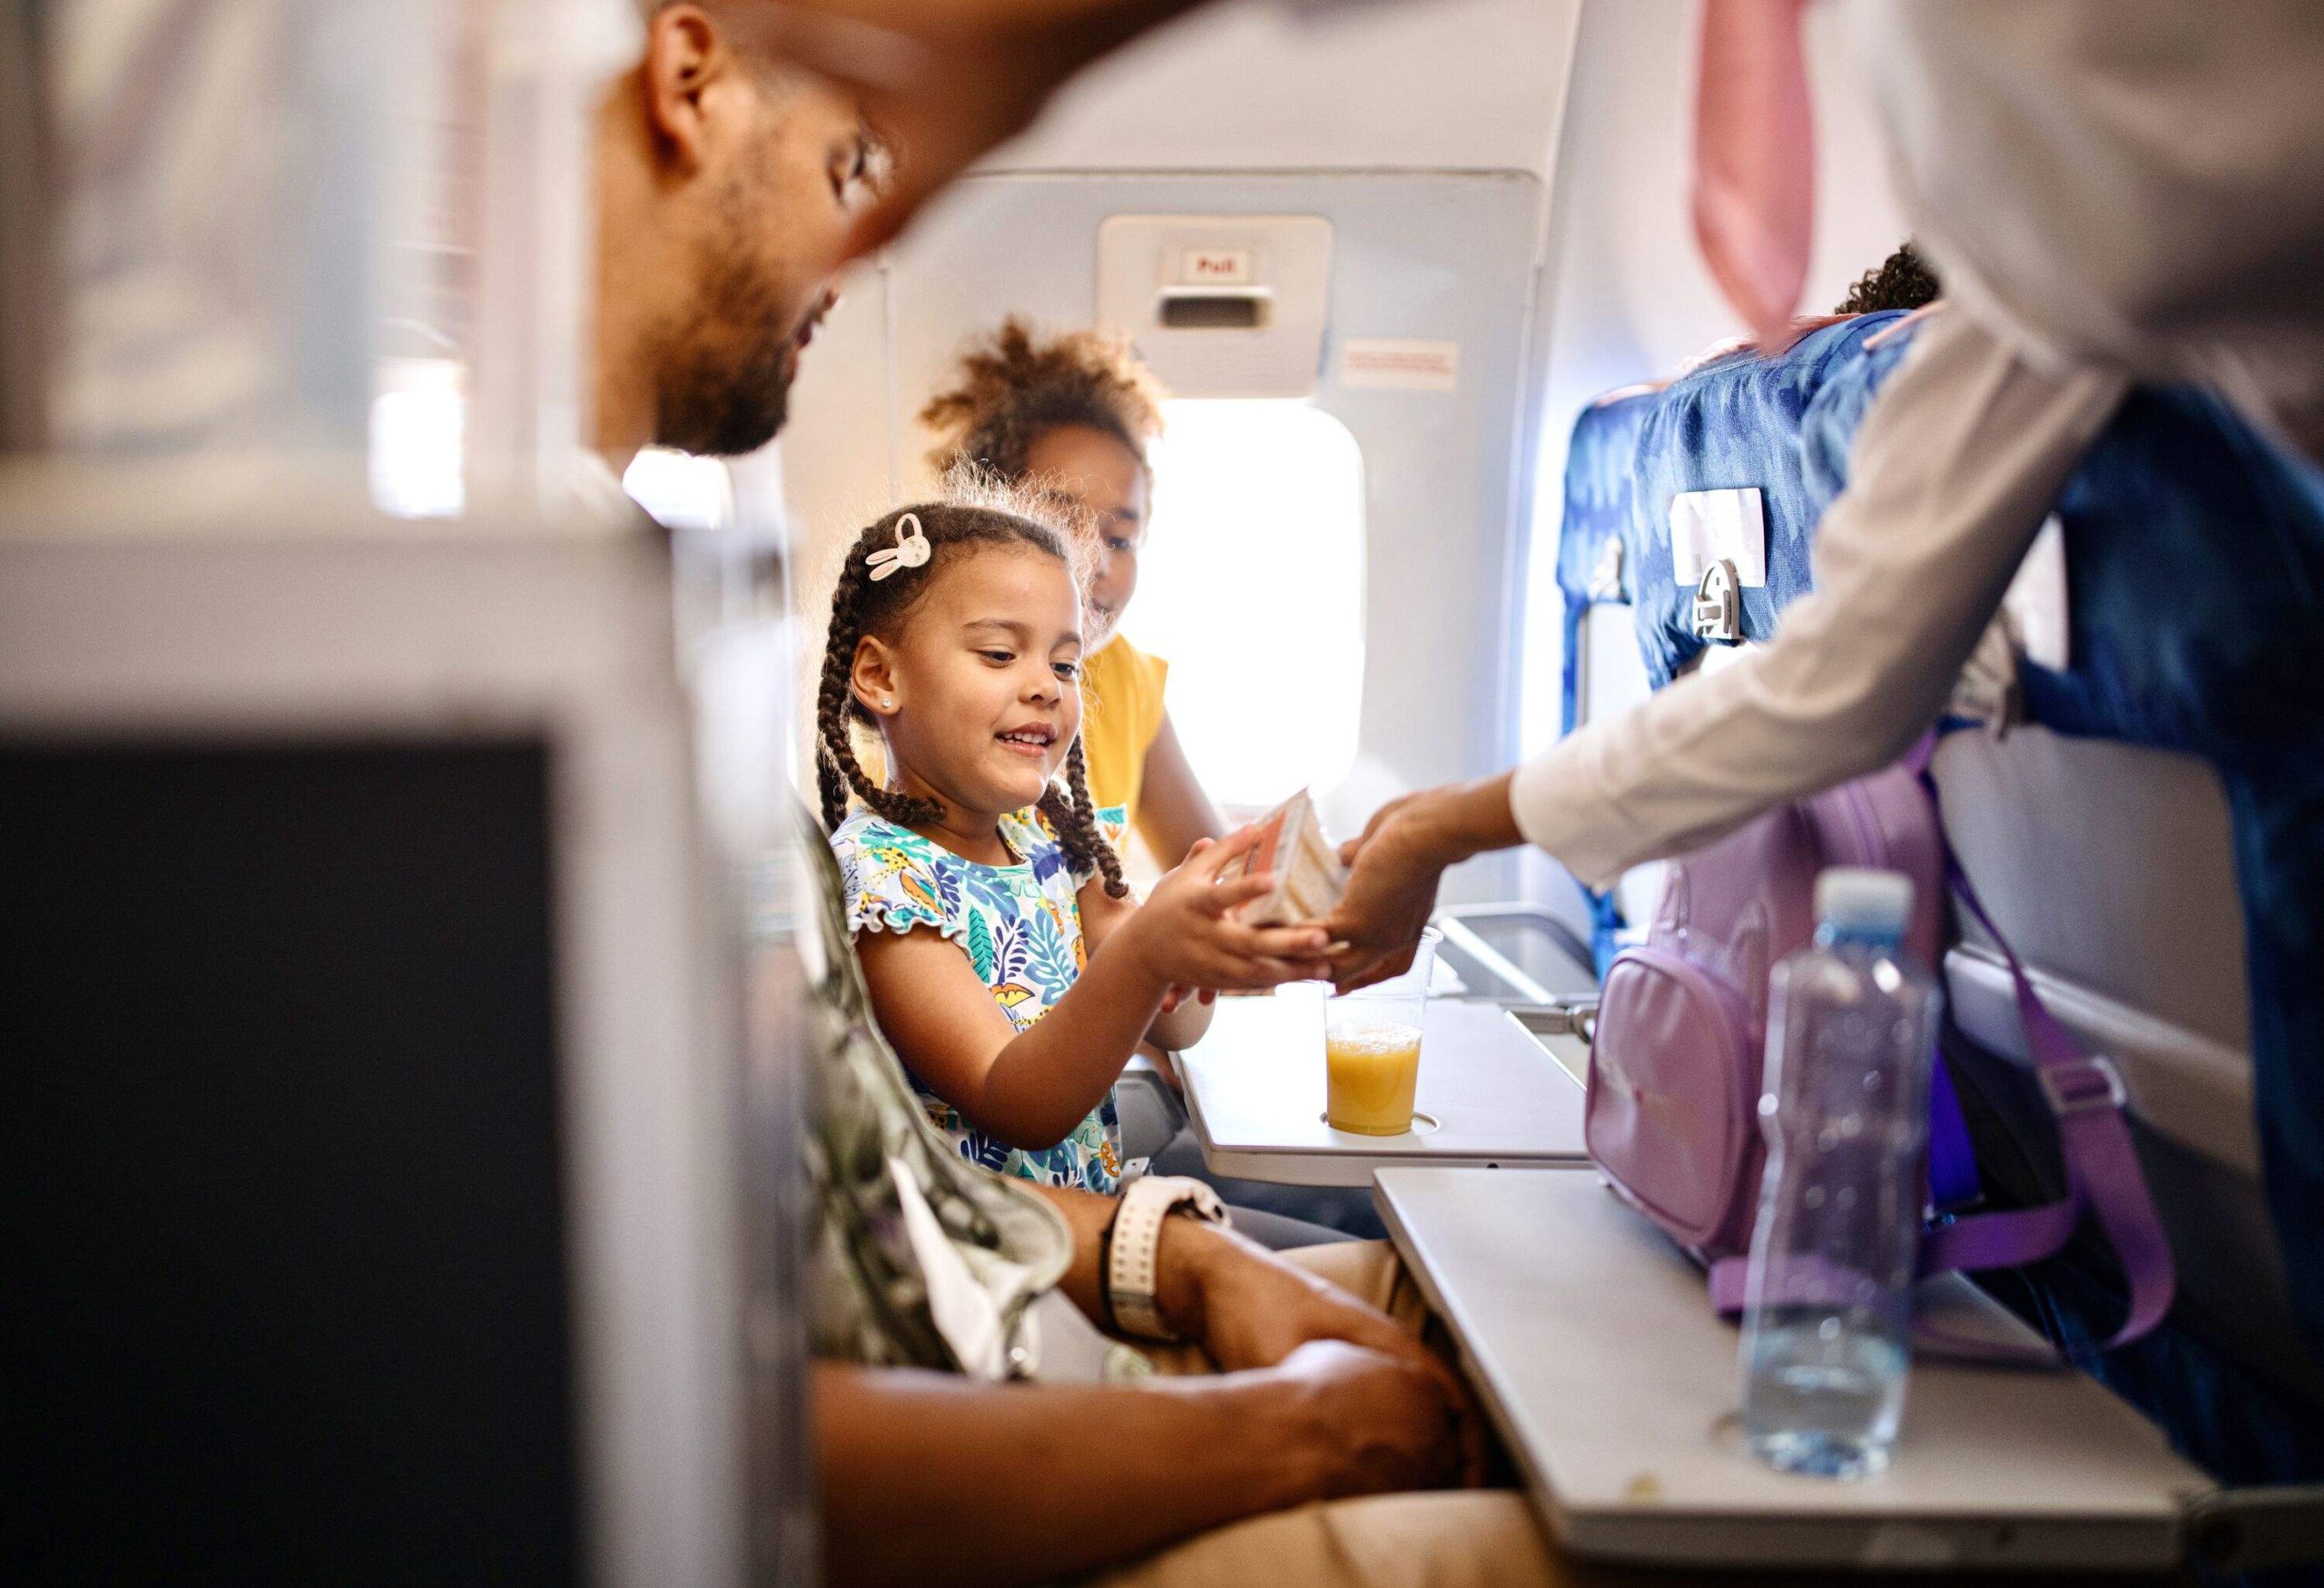 A little girl taking a snack handed by a cabin crew during flight.